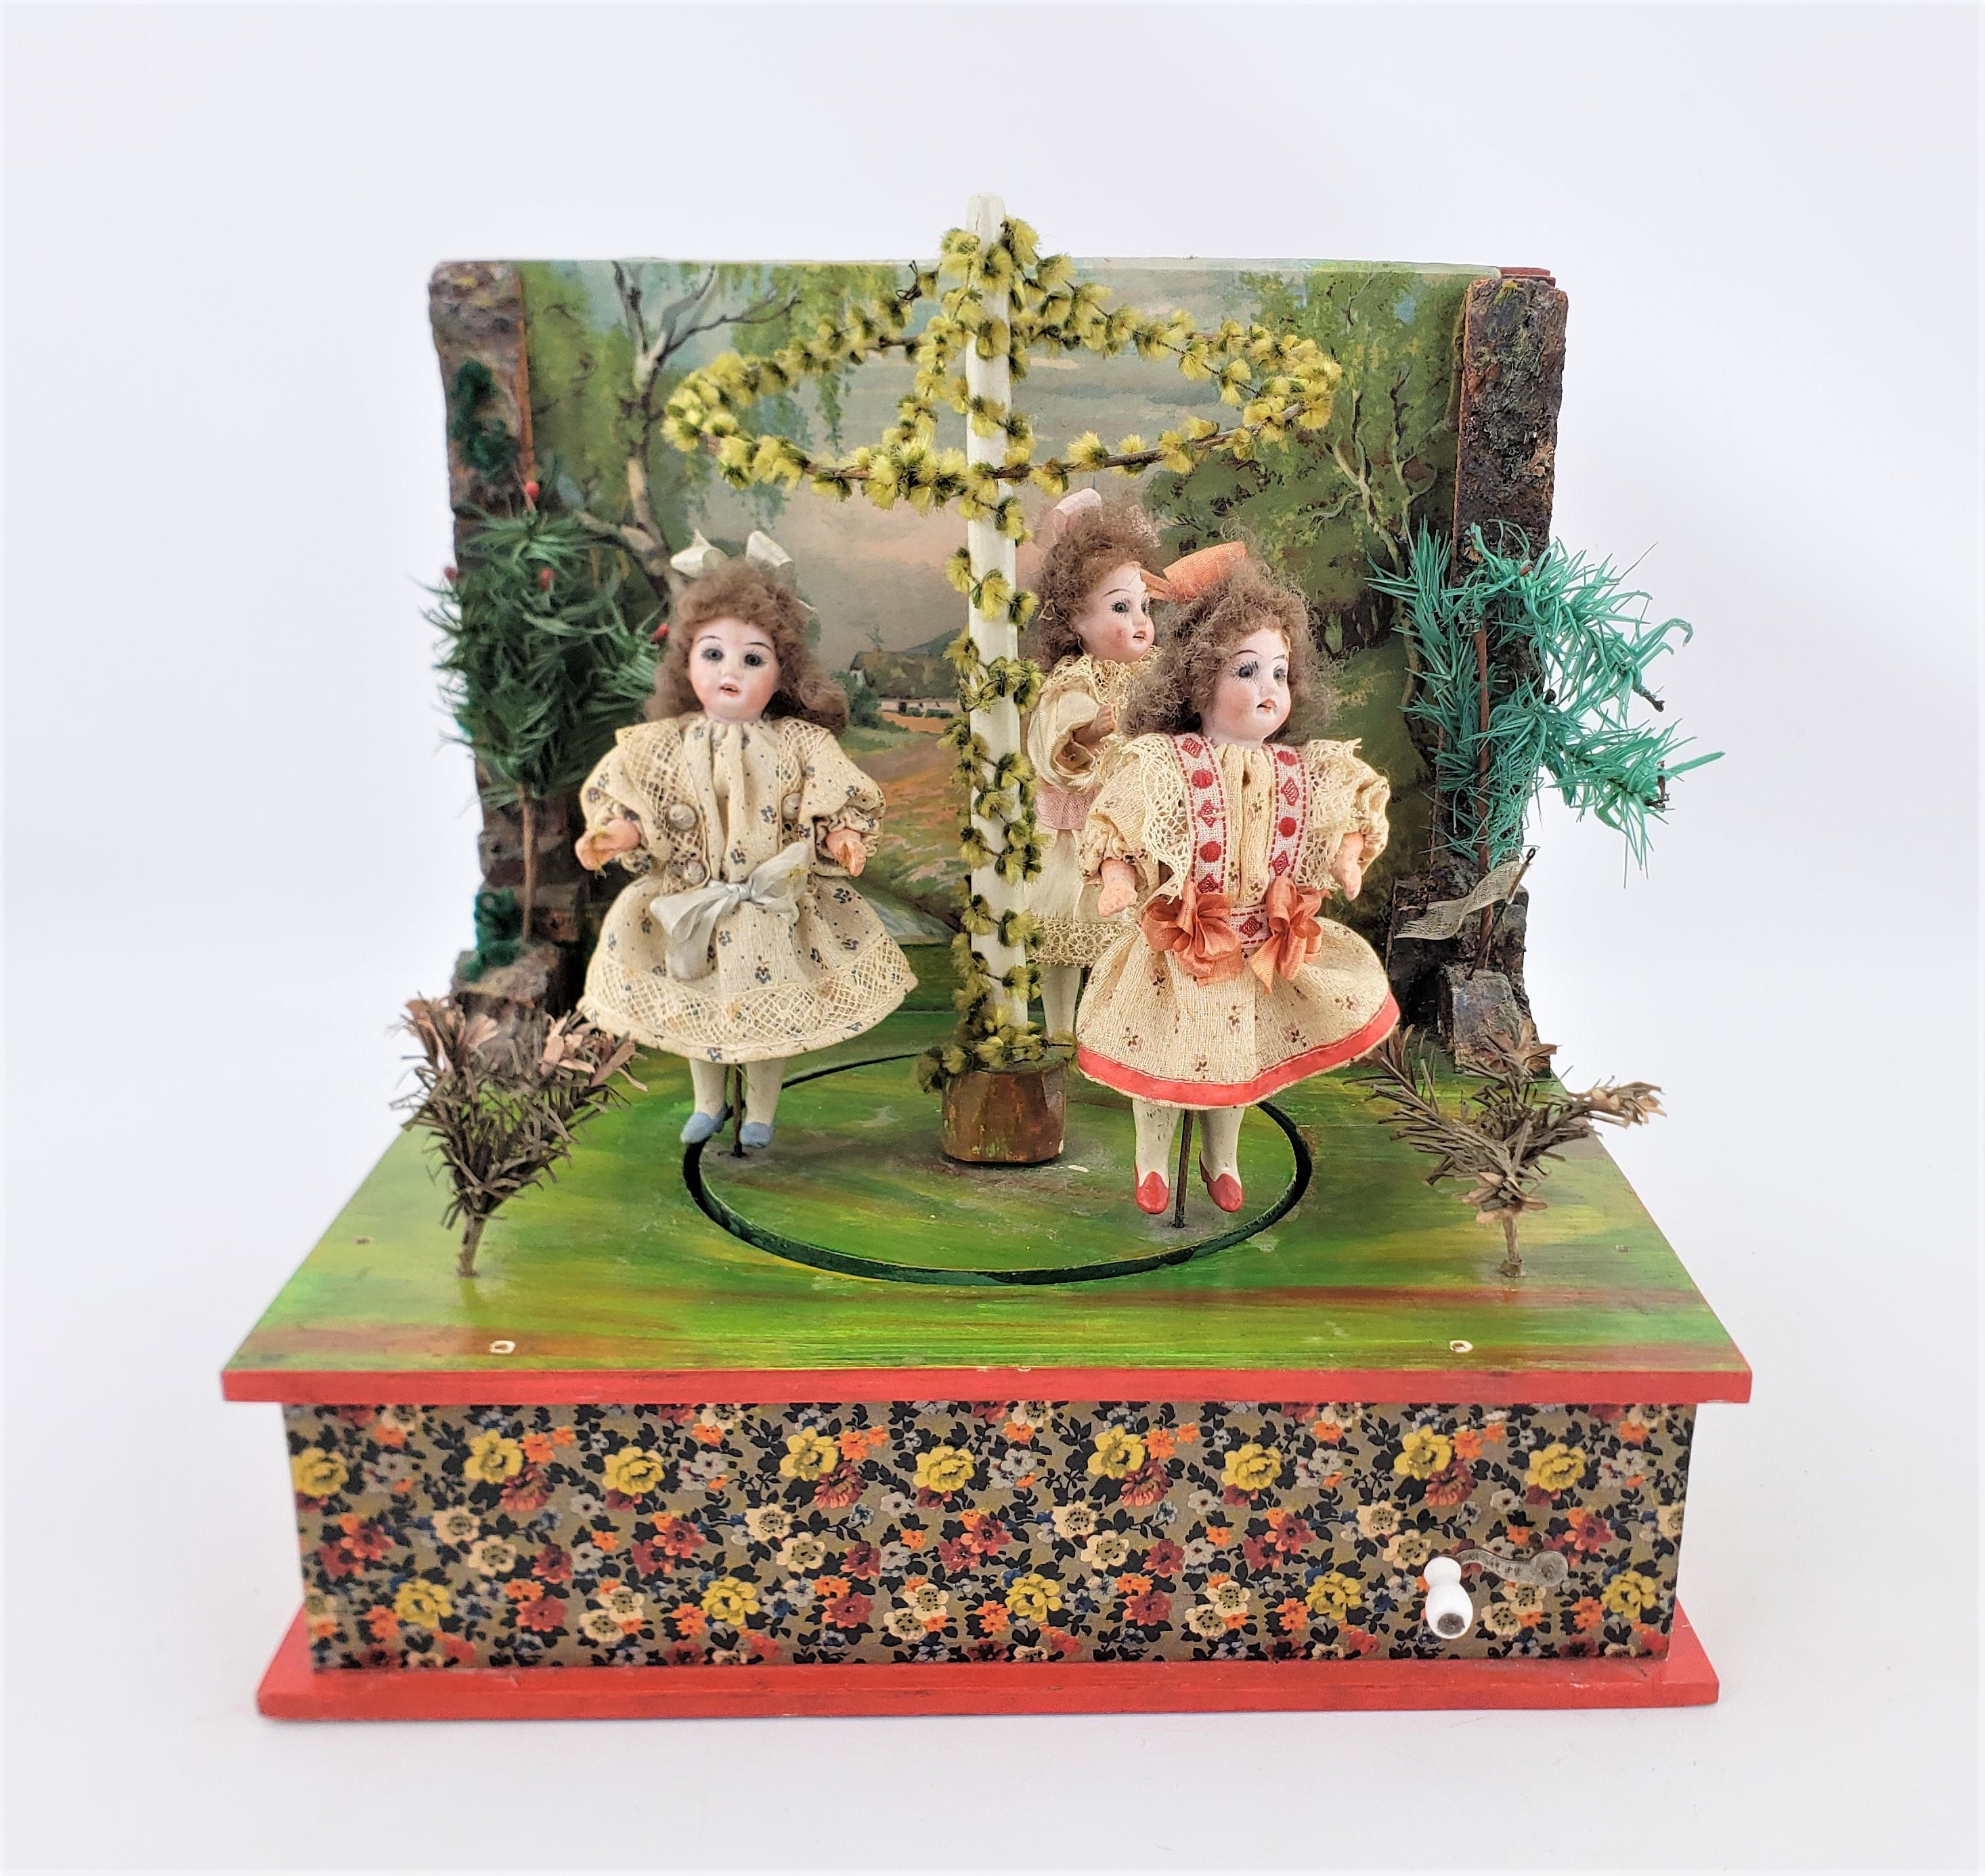 This antique mechanical toy music box shows no maker's signature, but is presumed to have been made in Germany in approximately 1900 in a period Bohemian style. The box is constructed of wood which has a hand-painted landscape on the back panel and